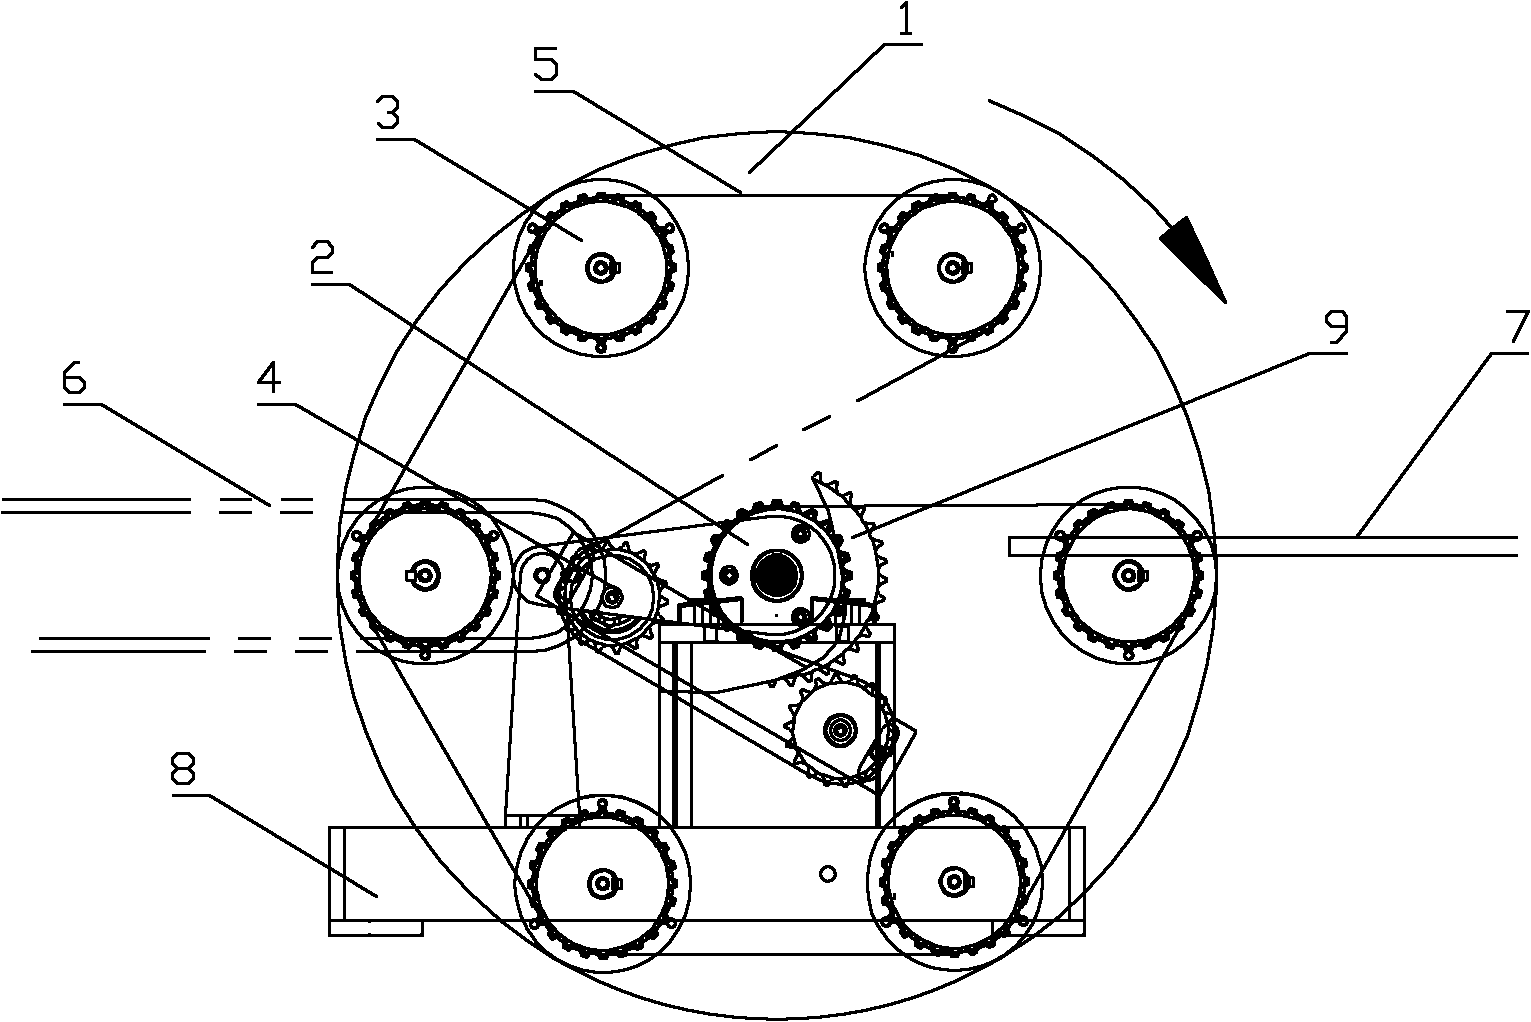 Automatic stacking mechanism of flaker